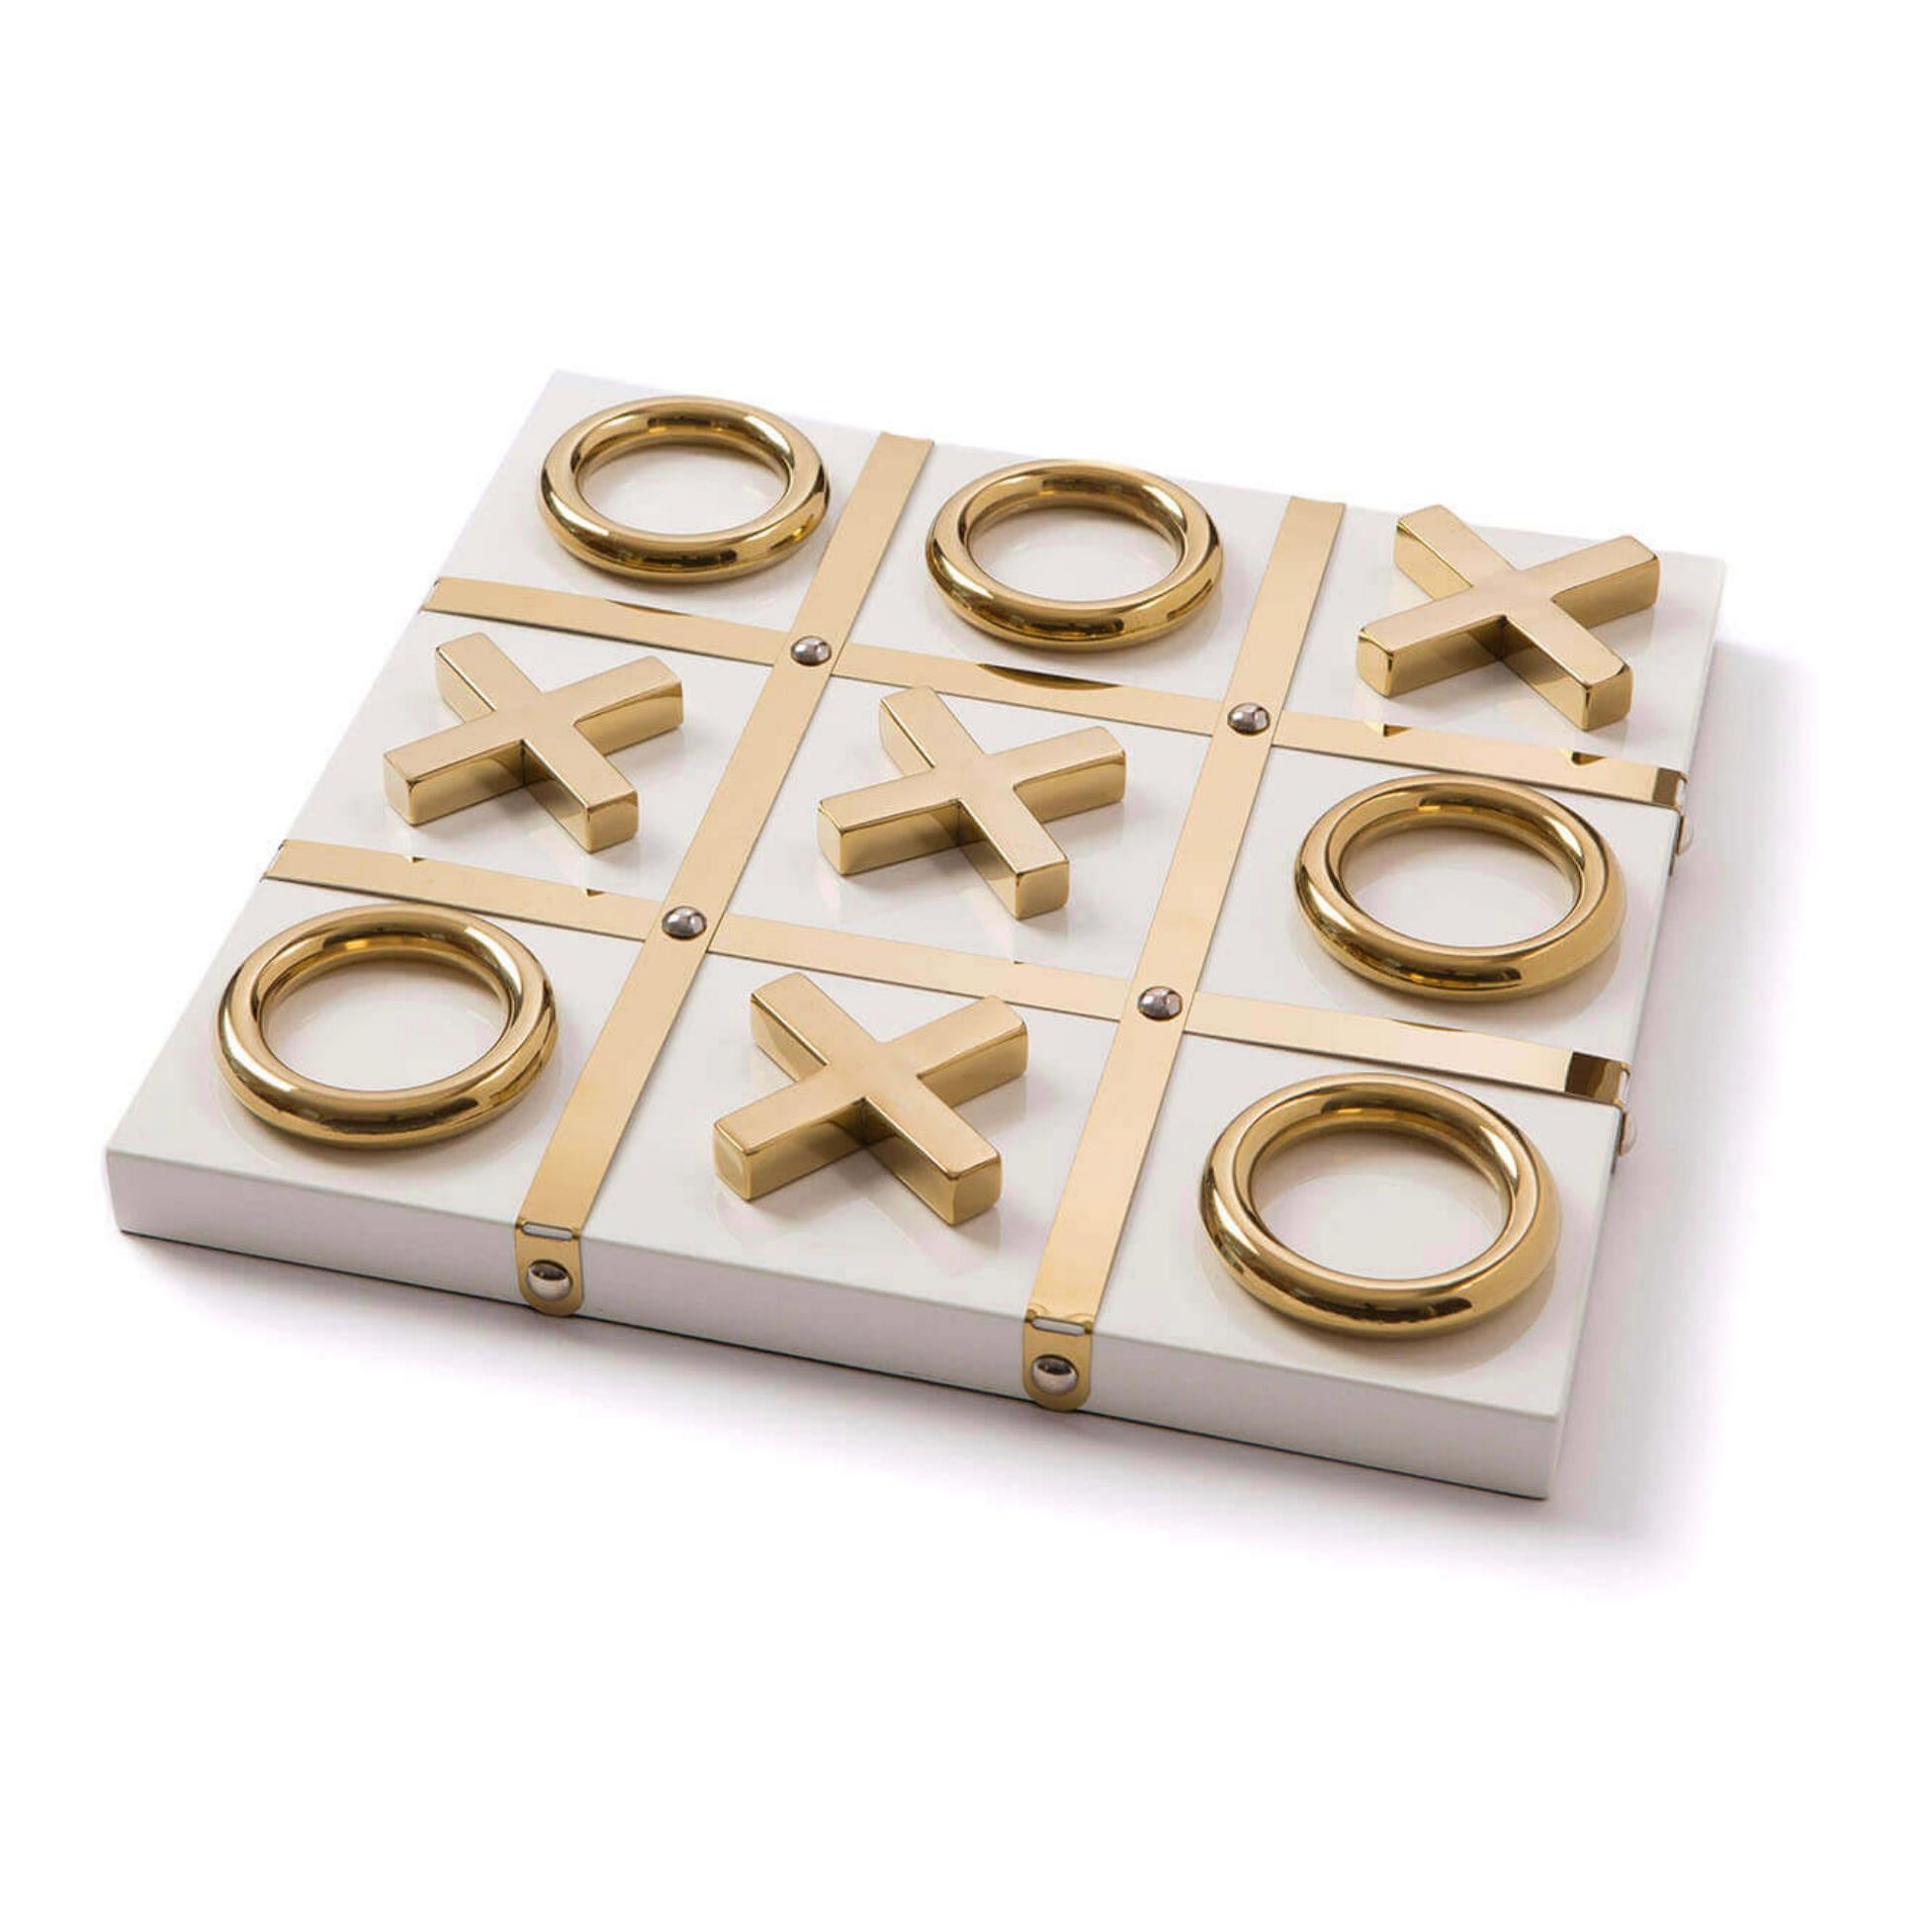 A luxury game night is ready with this white and gold Tic Tac Toe set made out of high quality acrylic with gold accents. Comes with 5 X’s and 5 O’s. 

Dimensions: 2